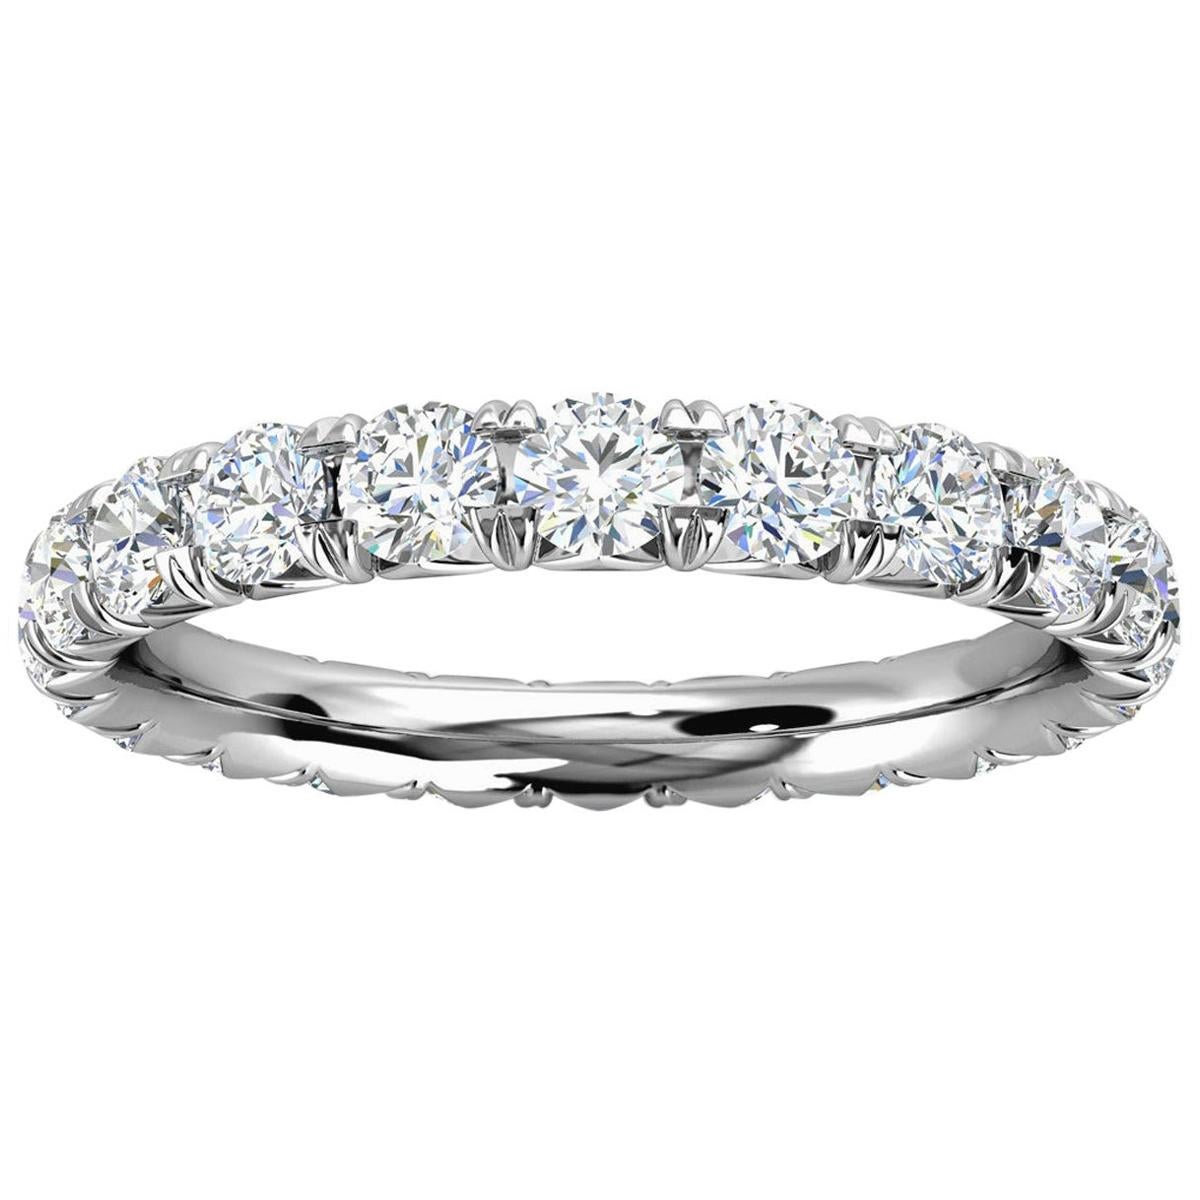 For Sale:  18k White Gold Mia French Pave Diamond Eternity Ring '1 1/2 Ct. Tw'